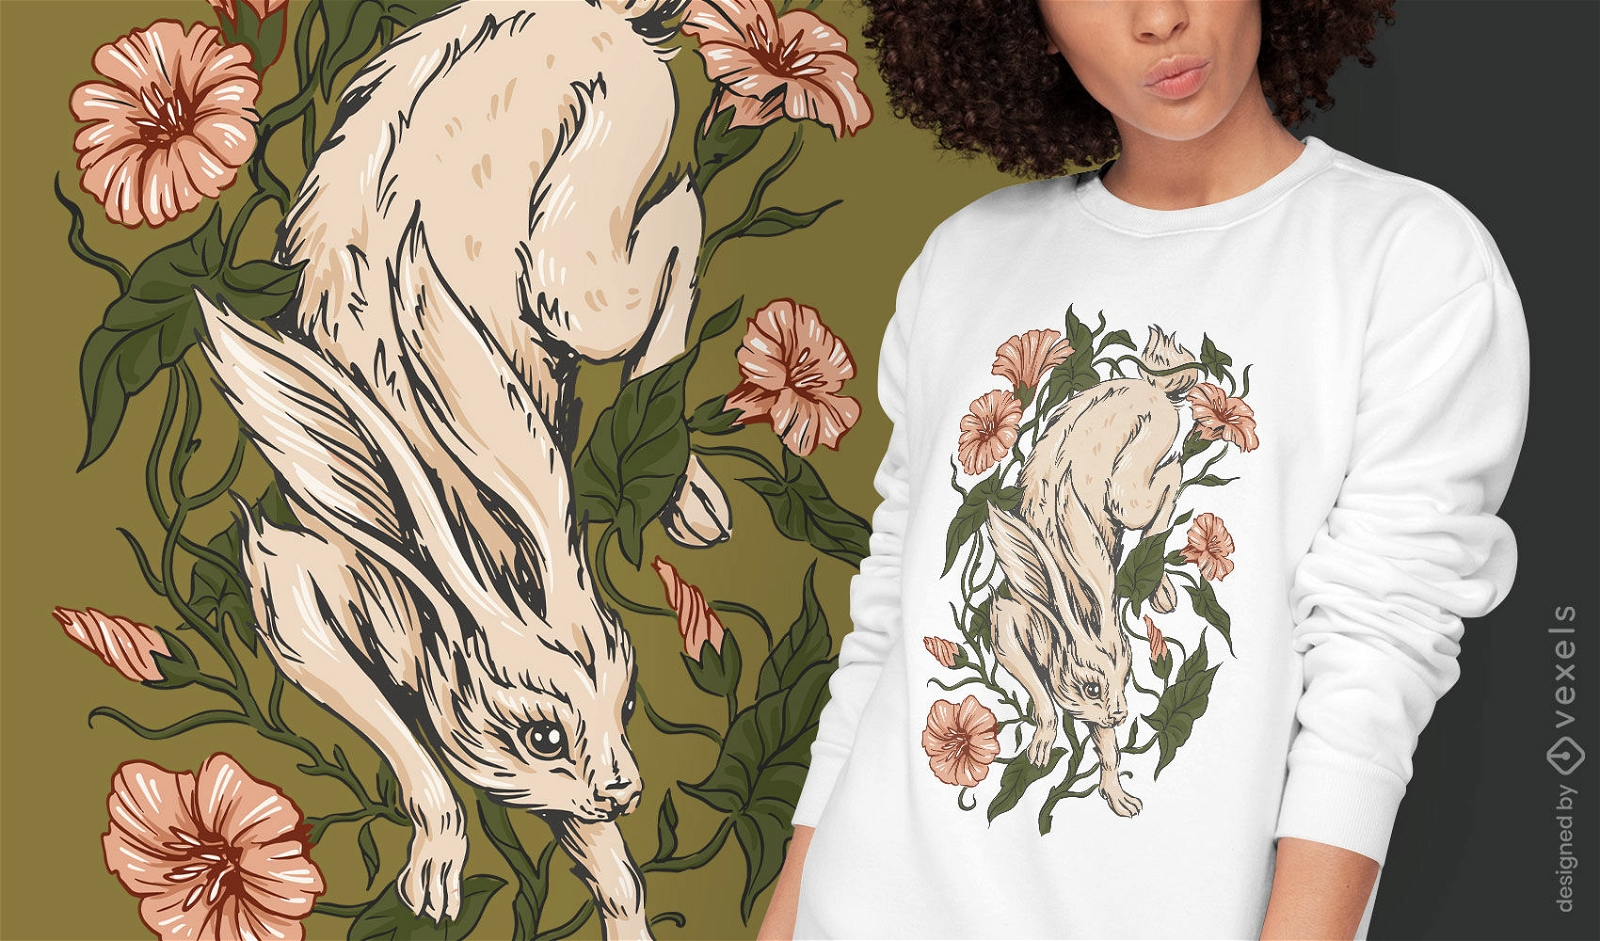 Hare and flowers illustration t-shirt design